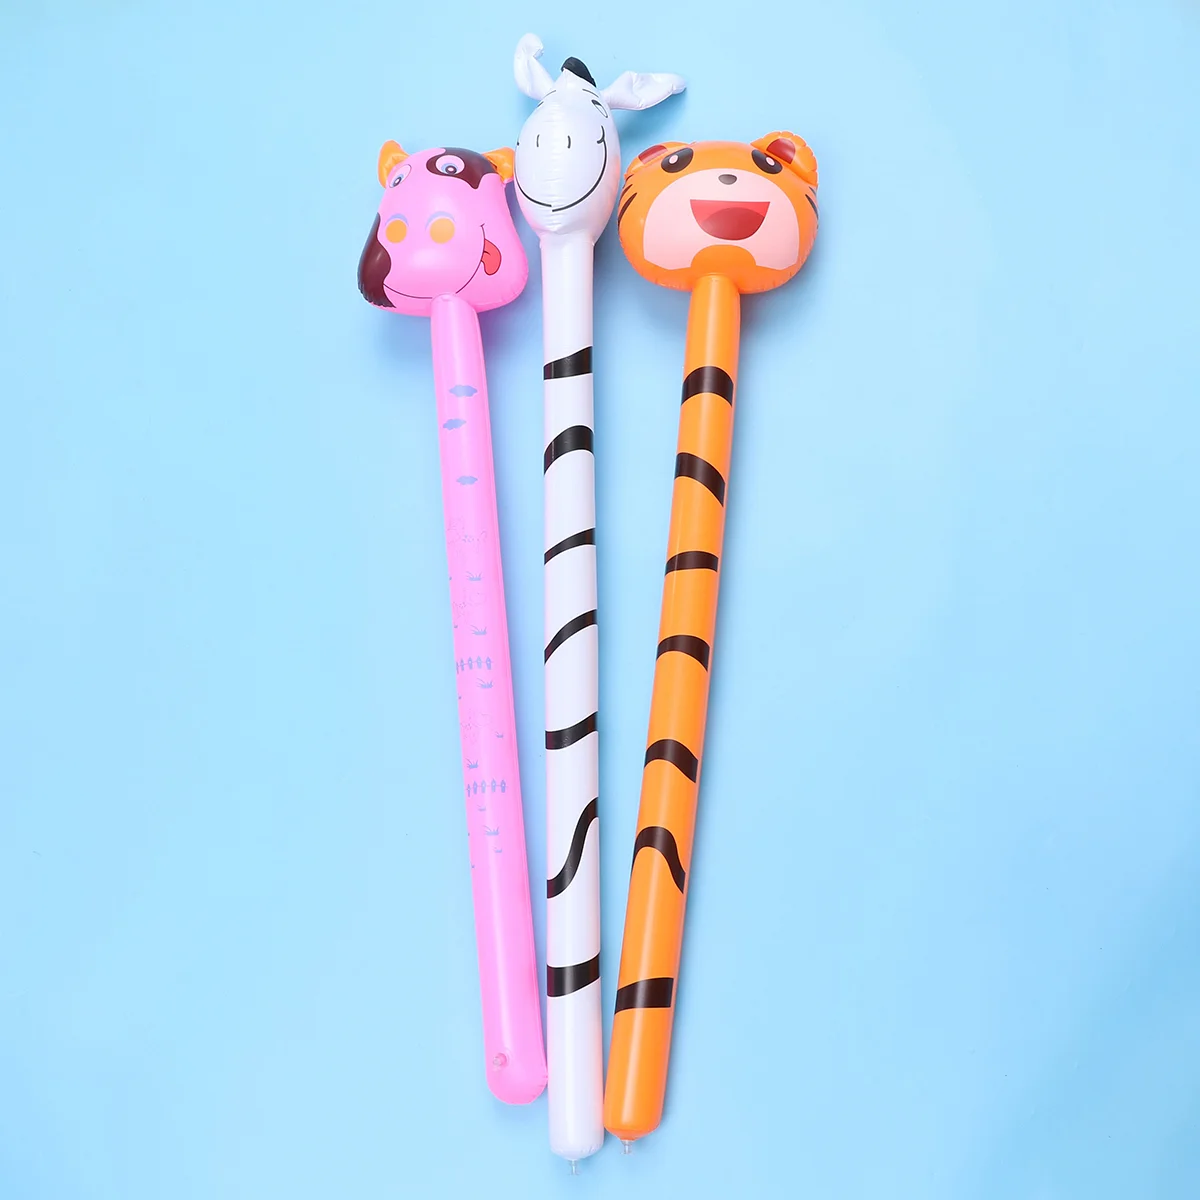 6pcs Kids PVC Kids Toy Toy Funny Inflatable Toy Playing Long Stick Toy (Mixed Style)